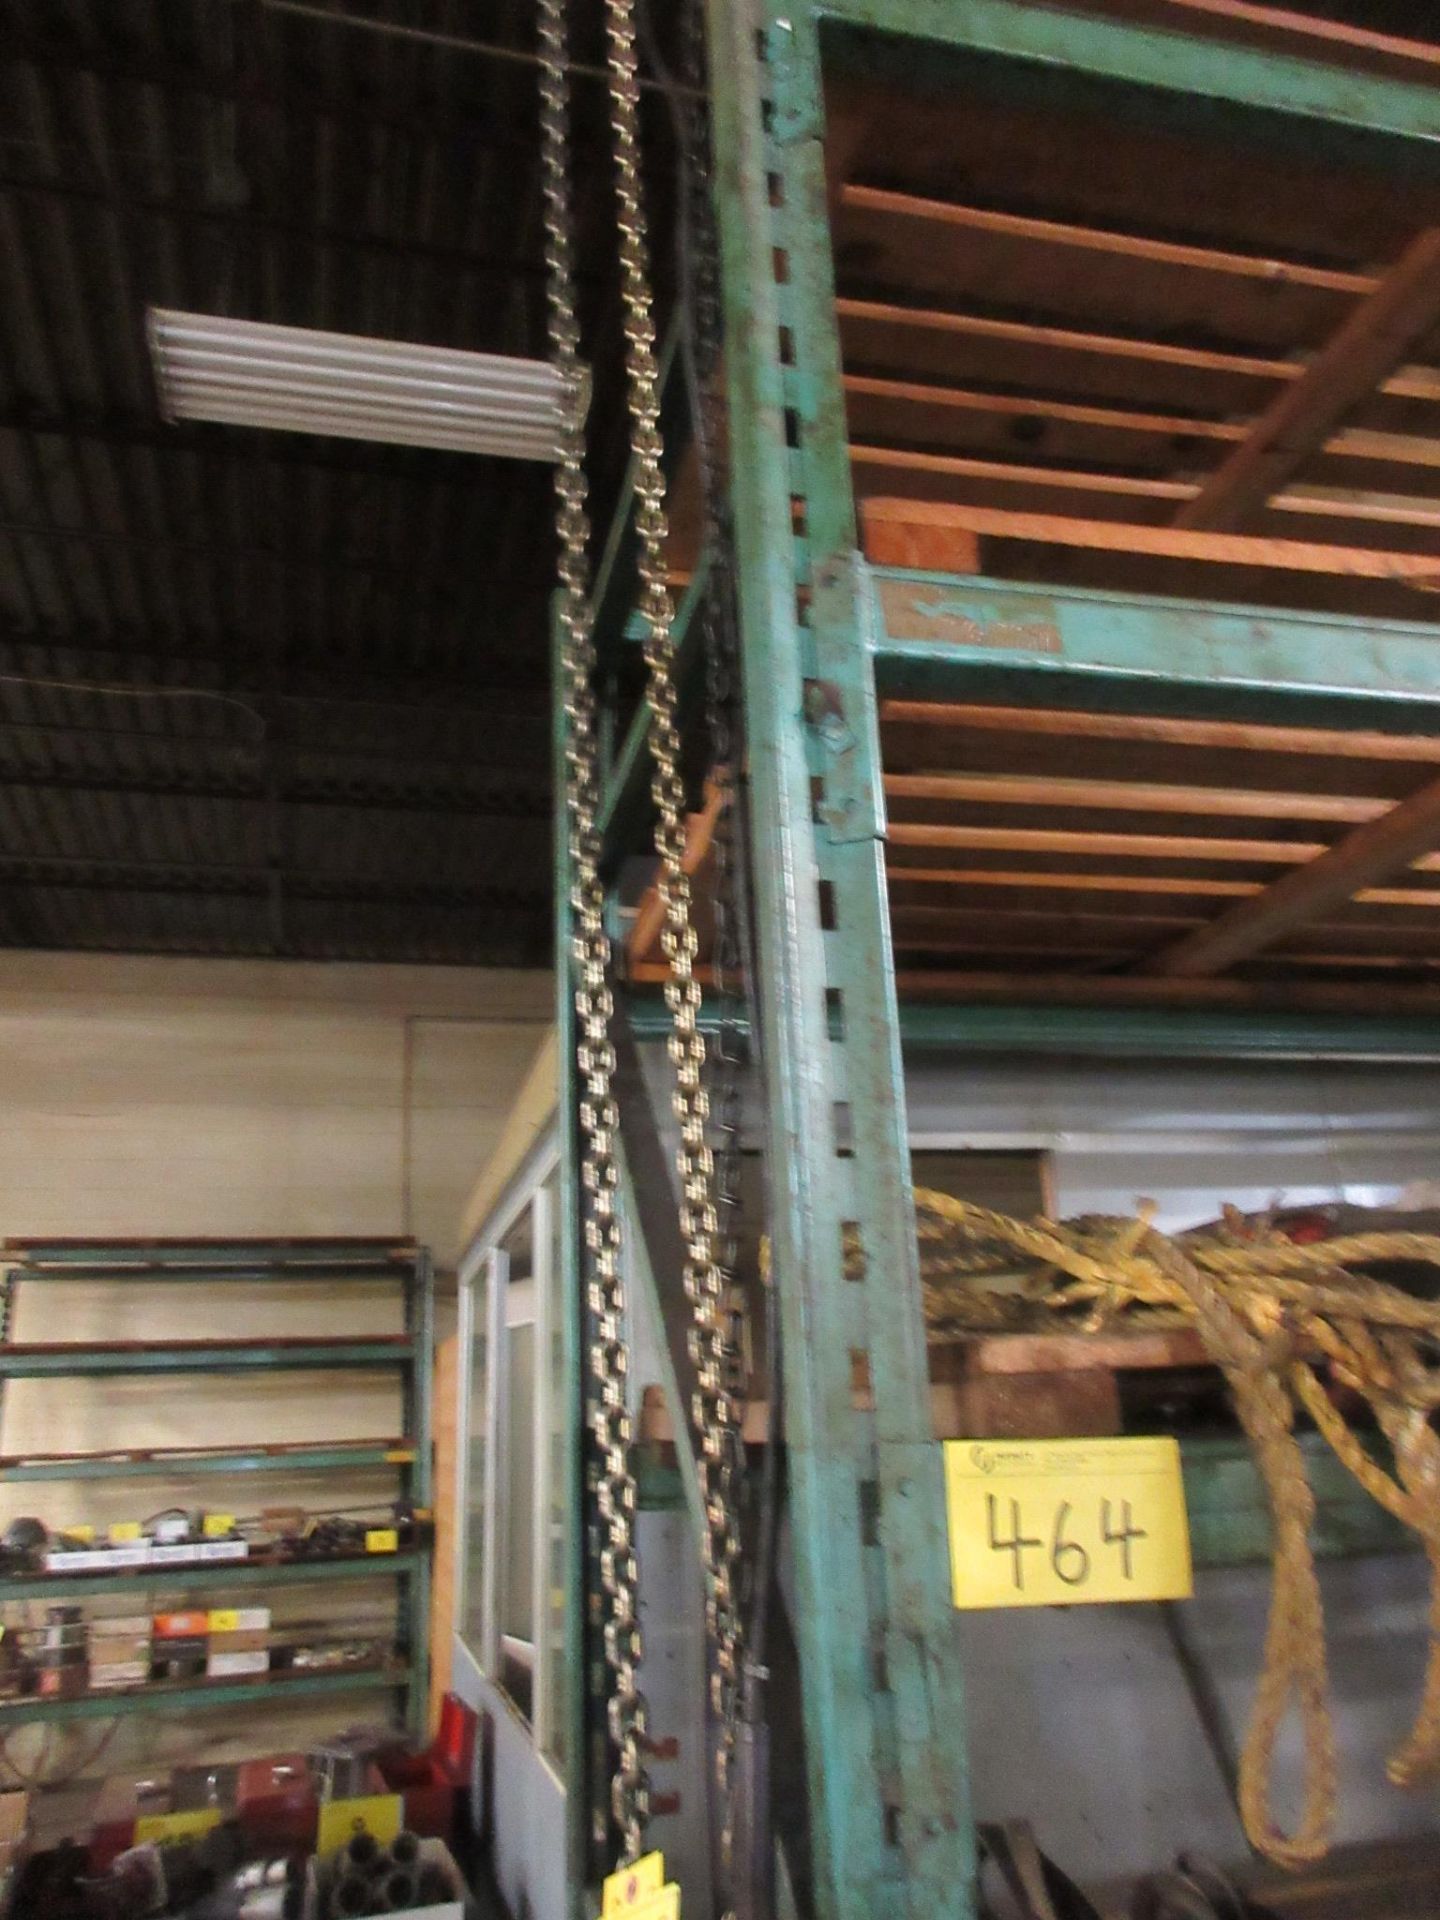 LOT OF (2) SECTIONS OF PALLET RACKING W/ PLYWOOD SHELVES, APPROX. 10'W X 42"D X 10'H FOR EACH (NO